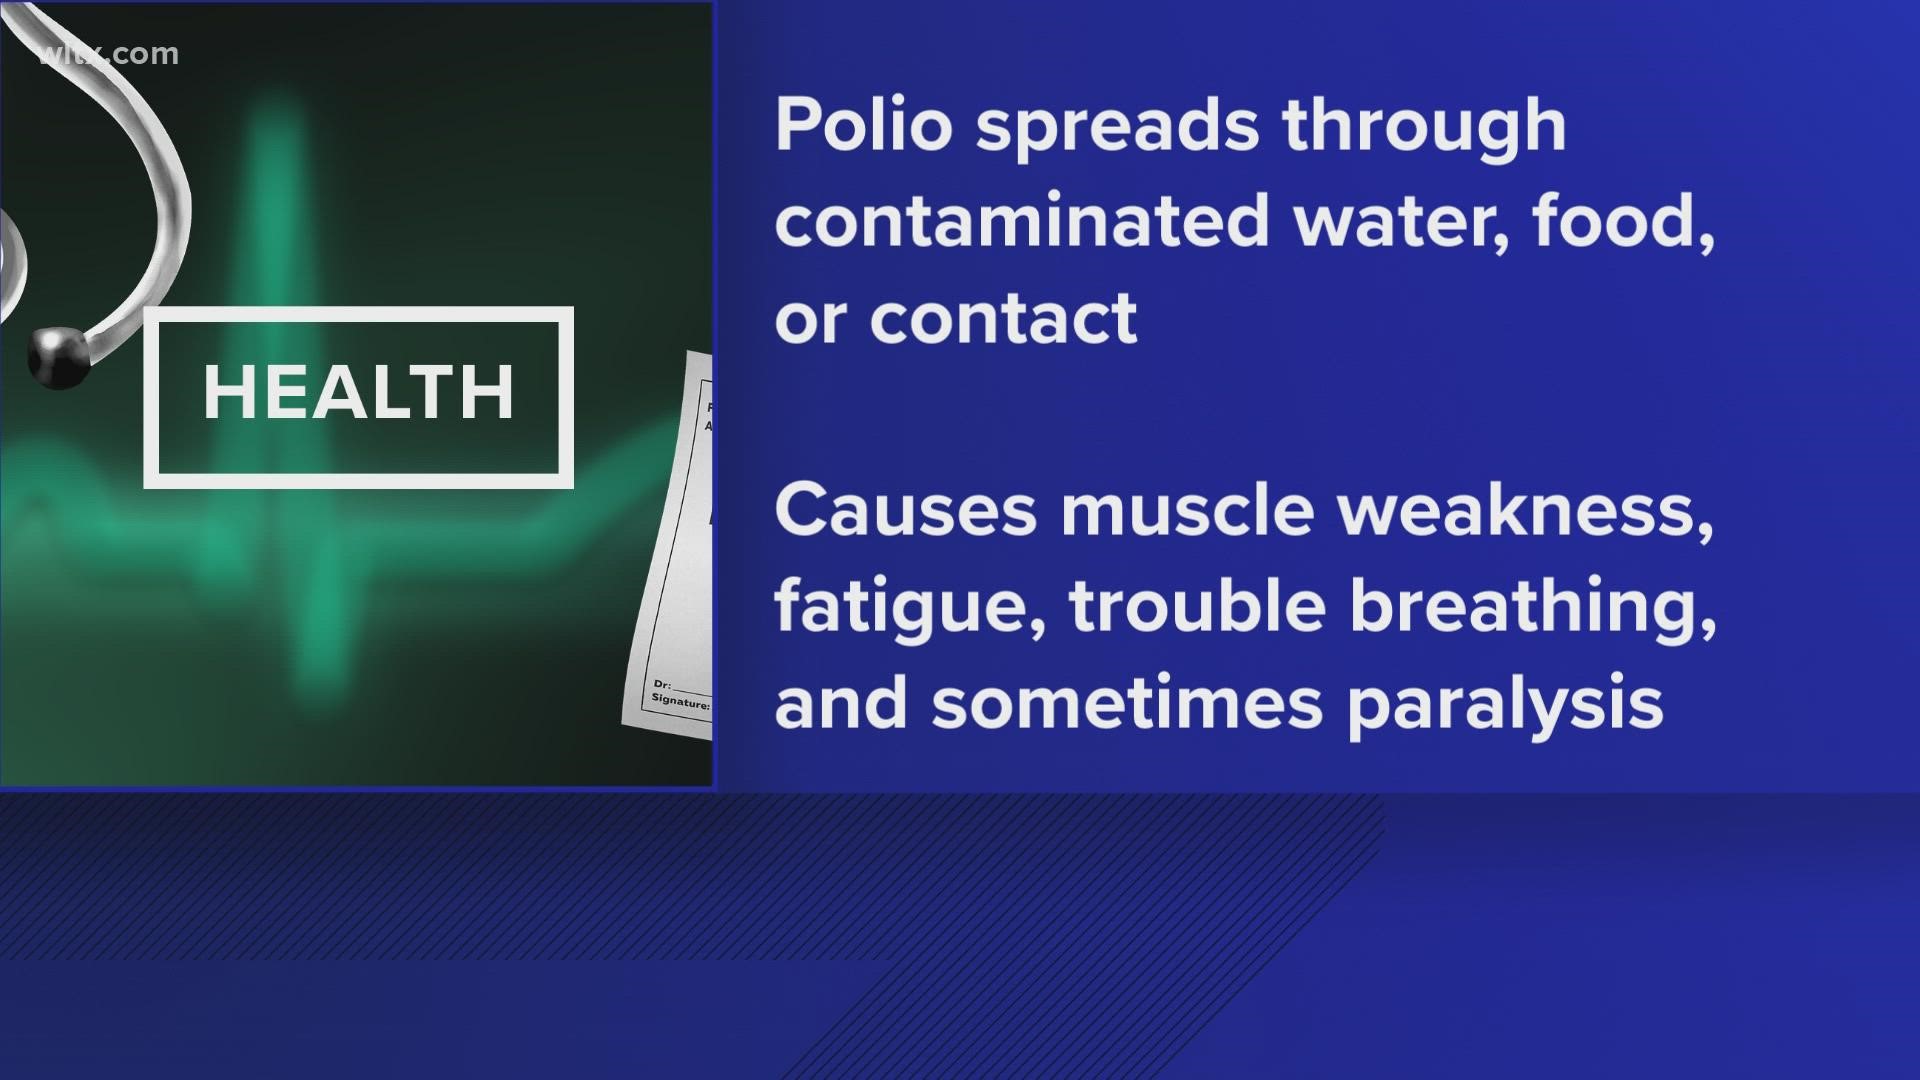 An unvaccinated young adult from New York recently contracted polio, the first U.S. case in nearly a decade, health officials said Thursday.